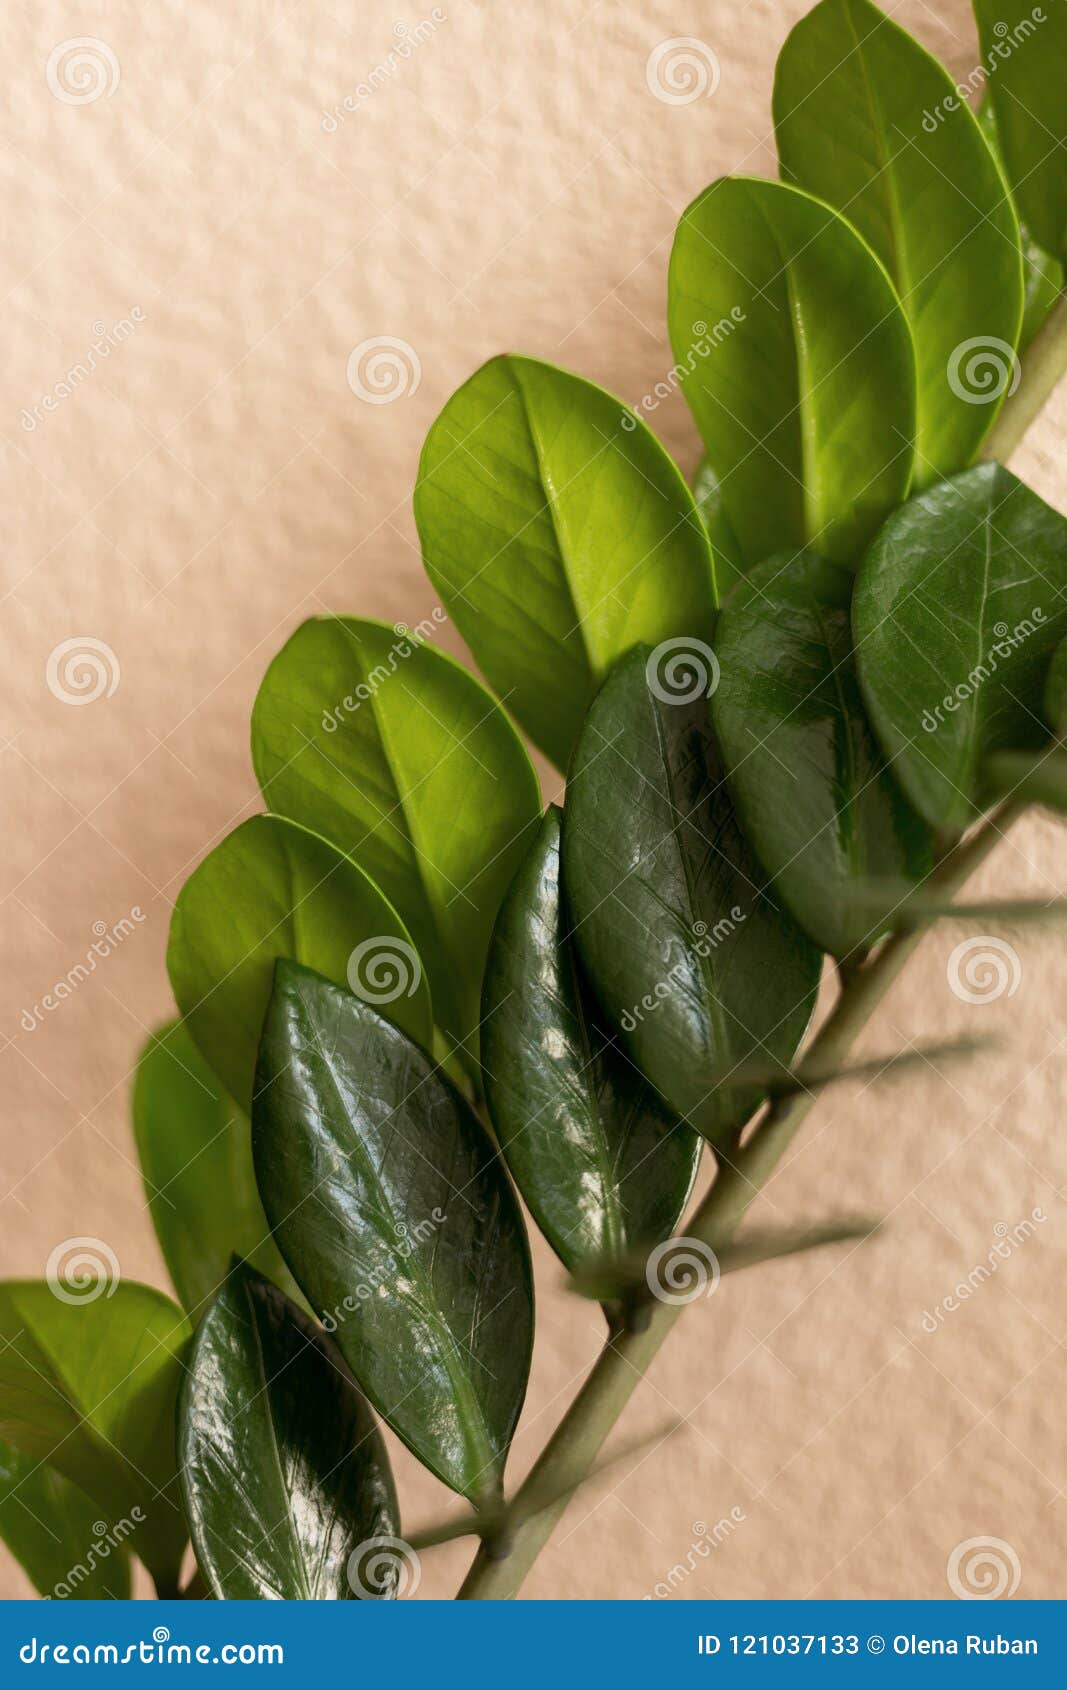 Leaves of Dollar Tree Close-up Stock Image - Image of life, flower